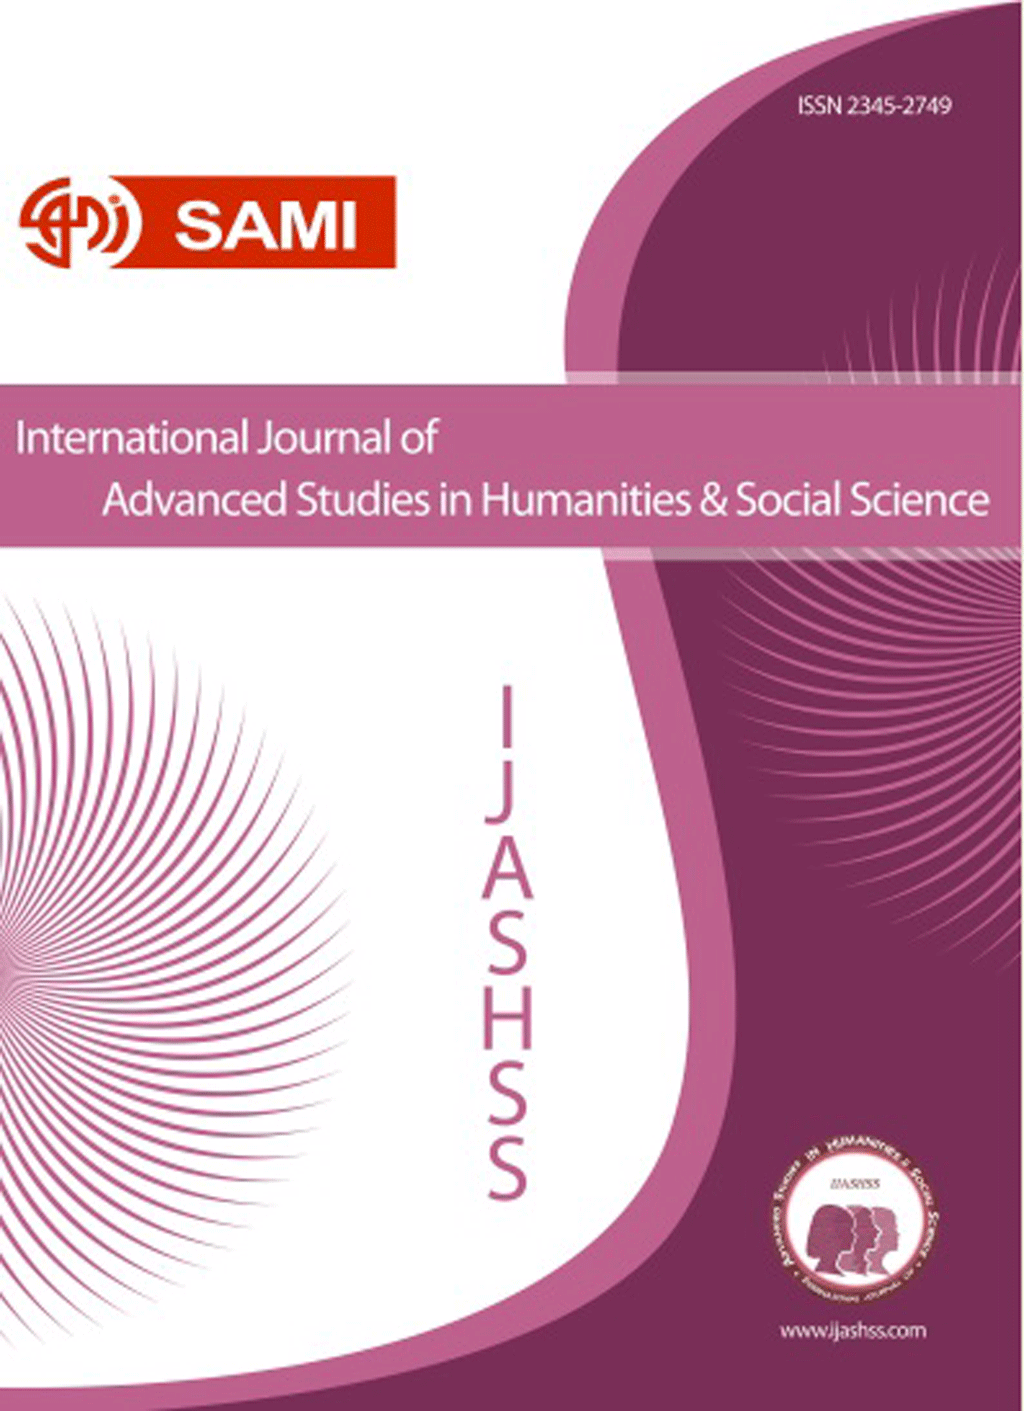 International Journal of Advanced Studies in Humanities and Social Science - September 2022, Volume 11 - Issue 4